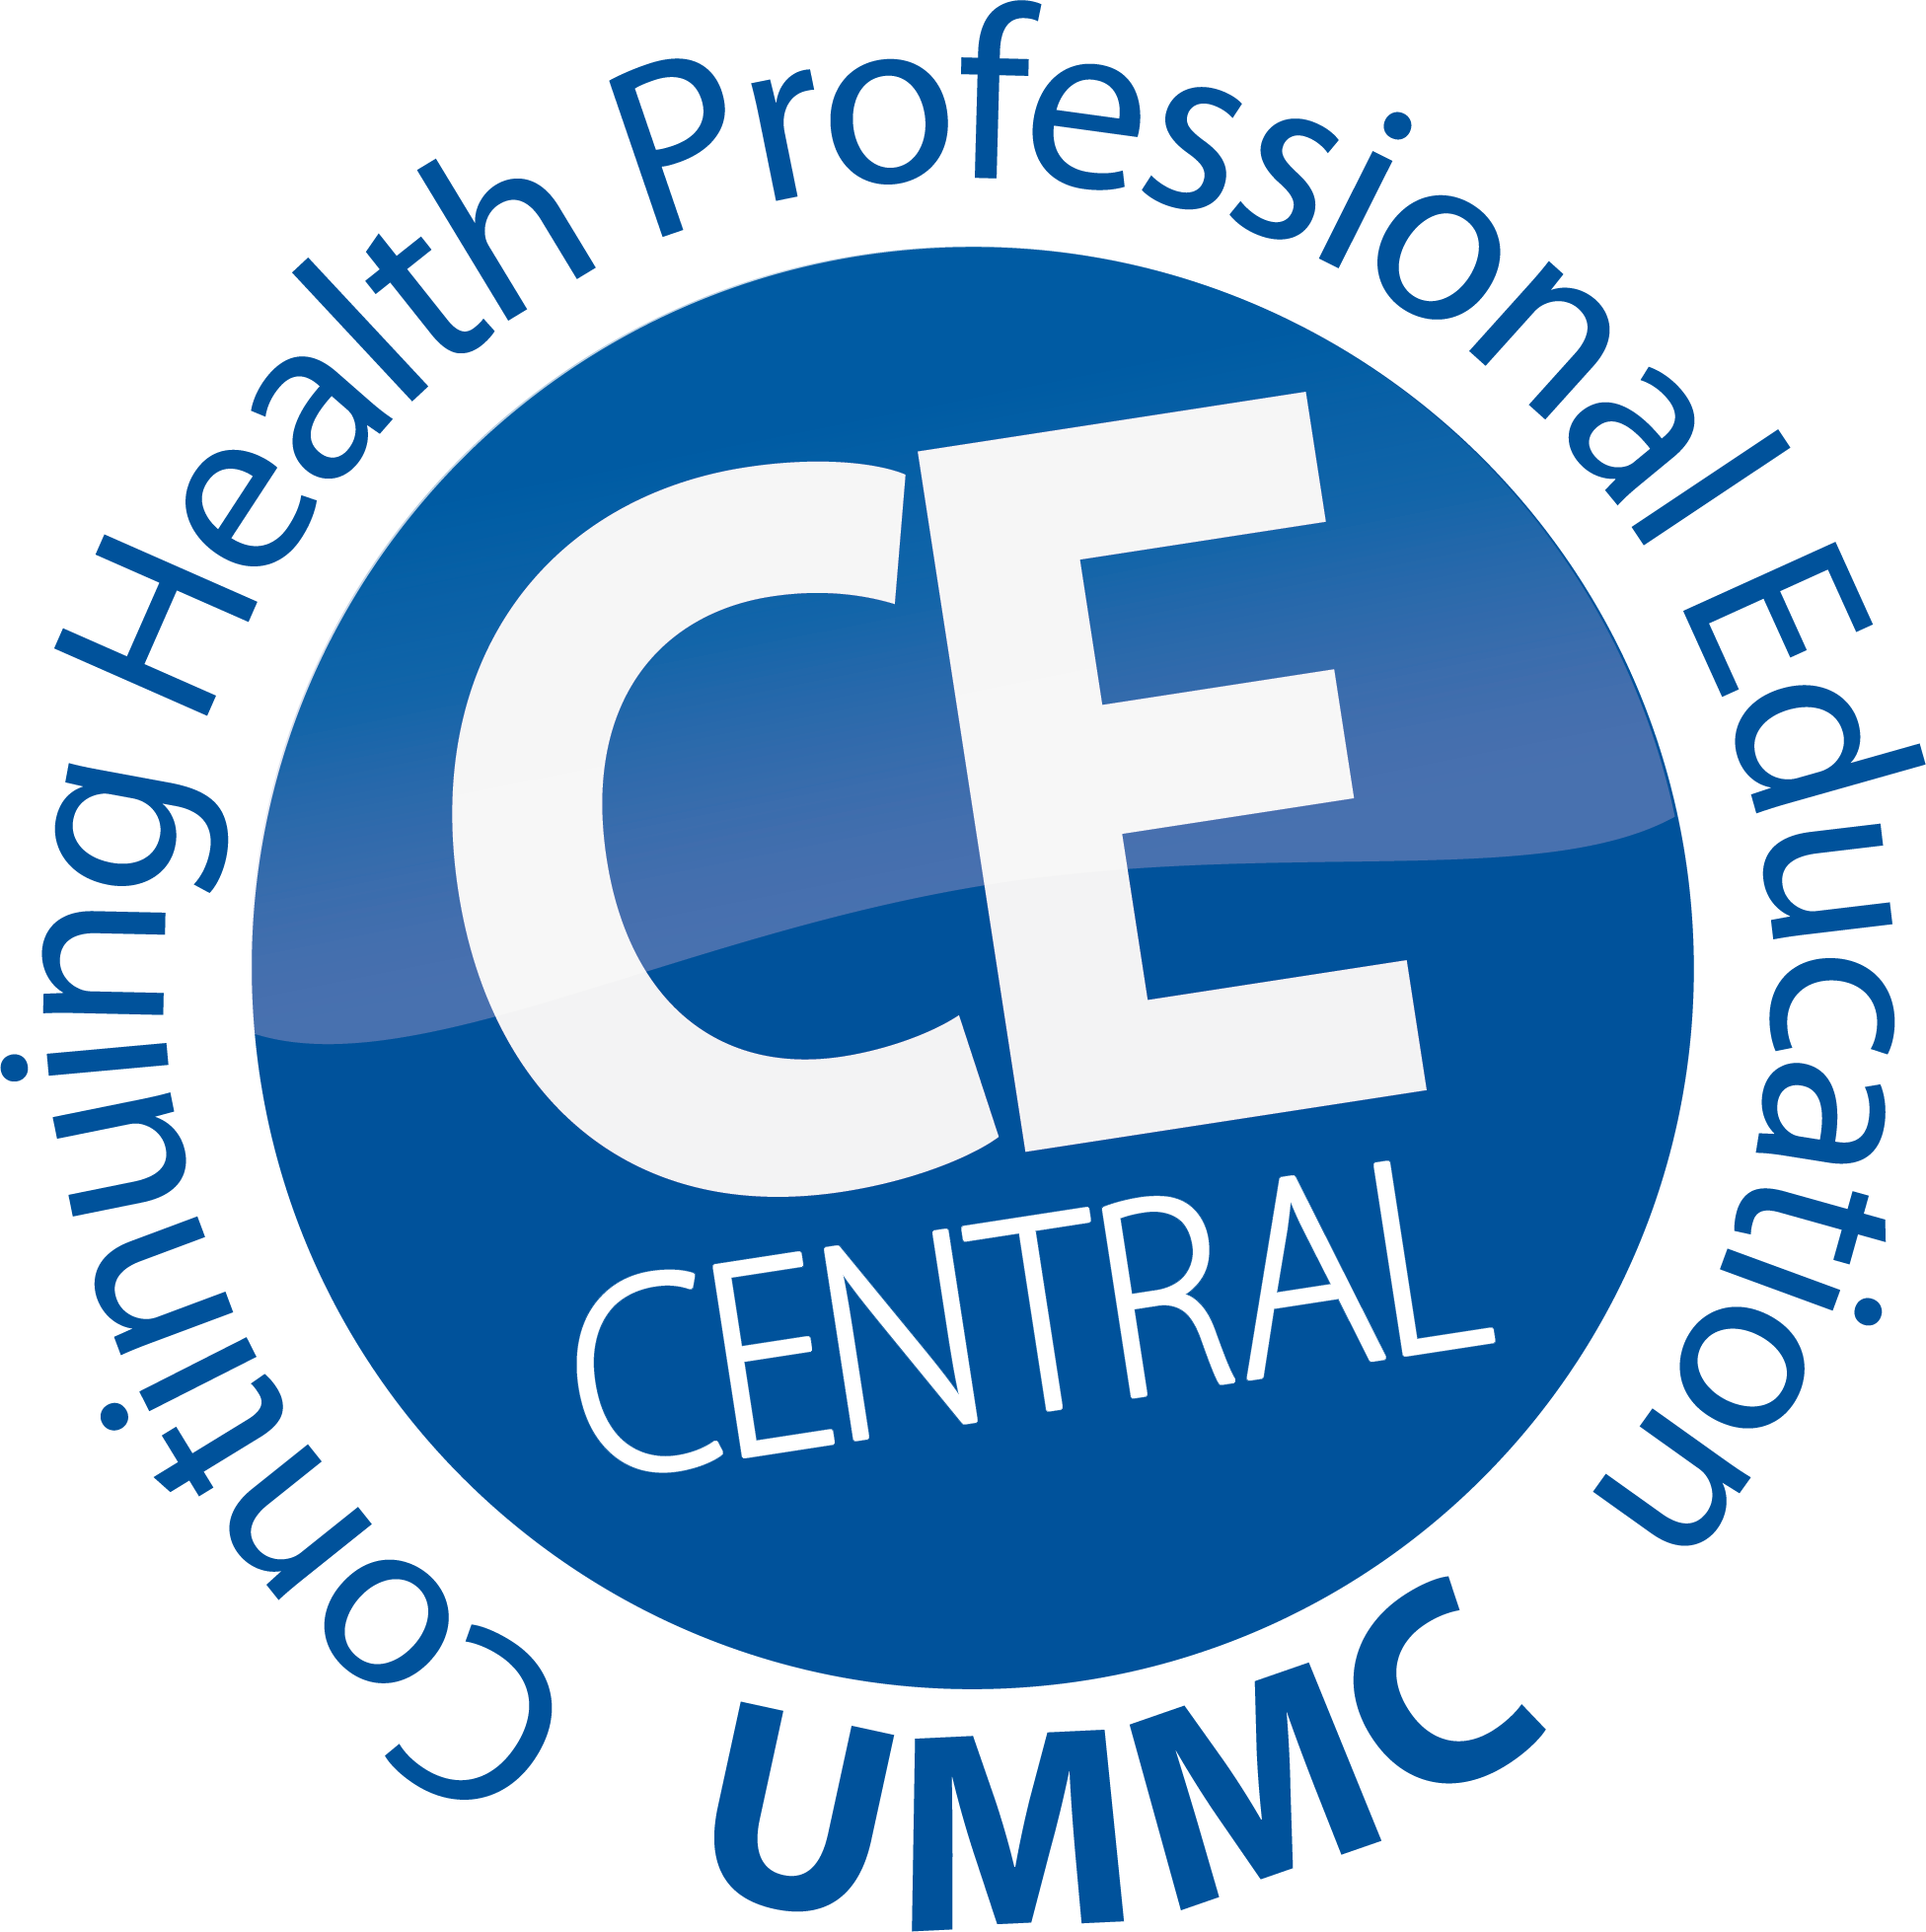 CE Central logo.png